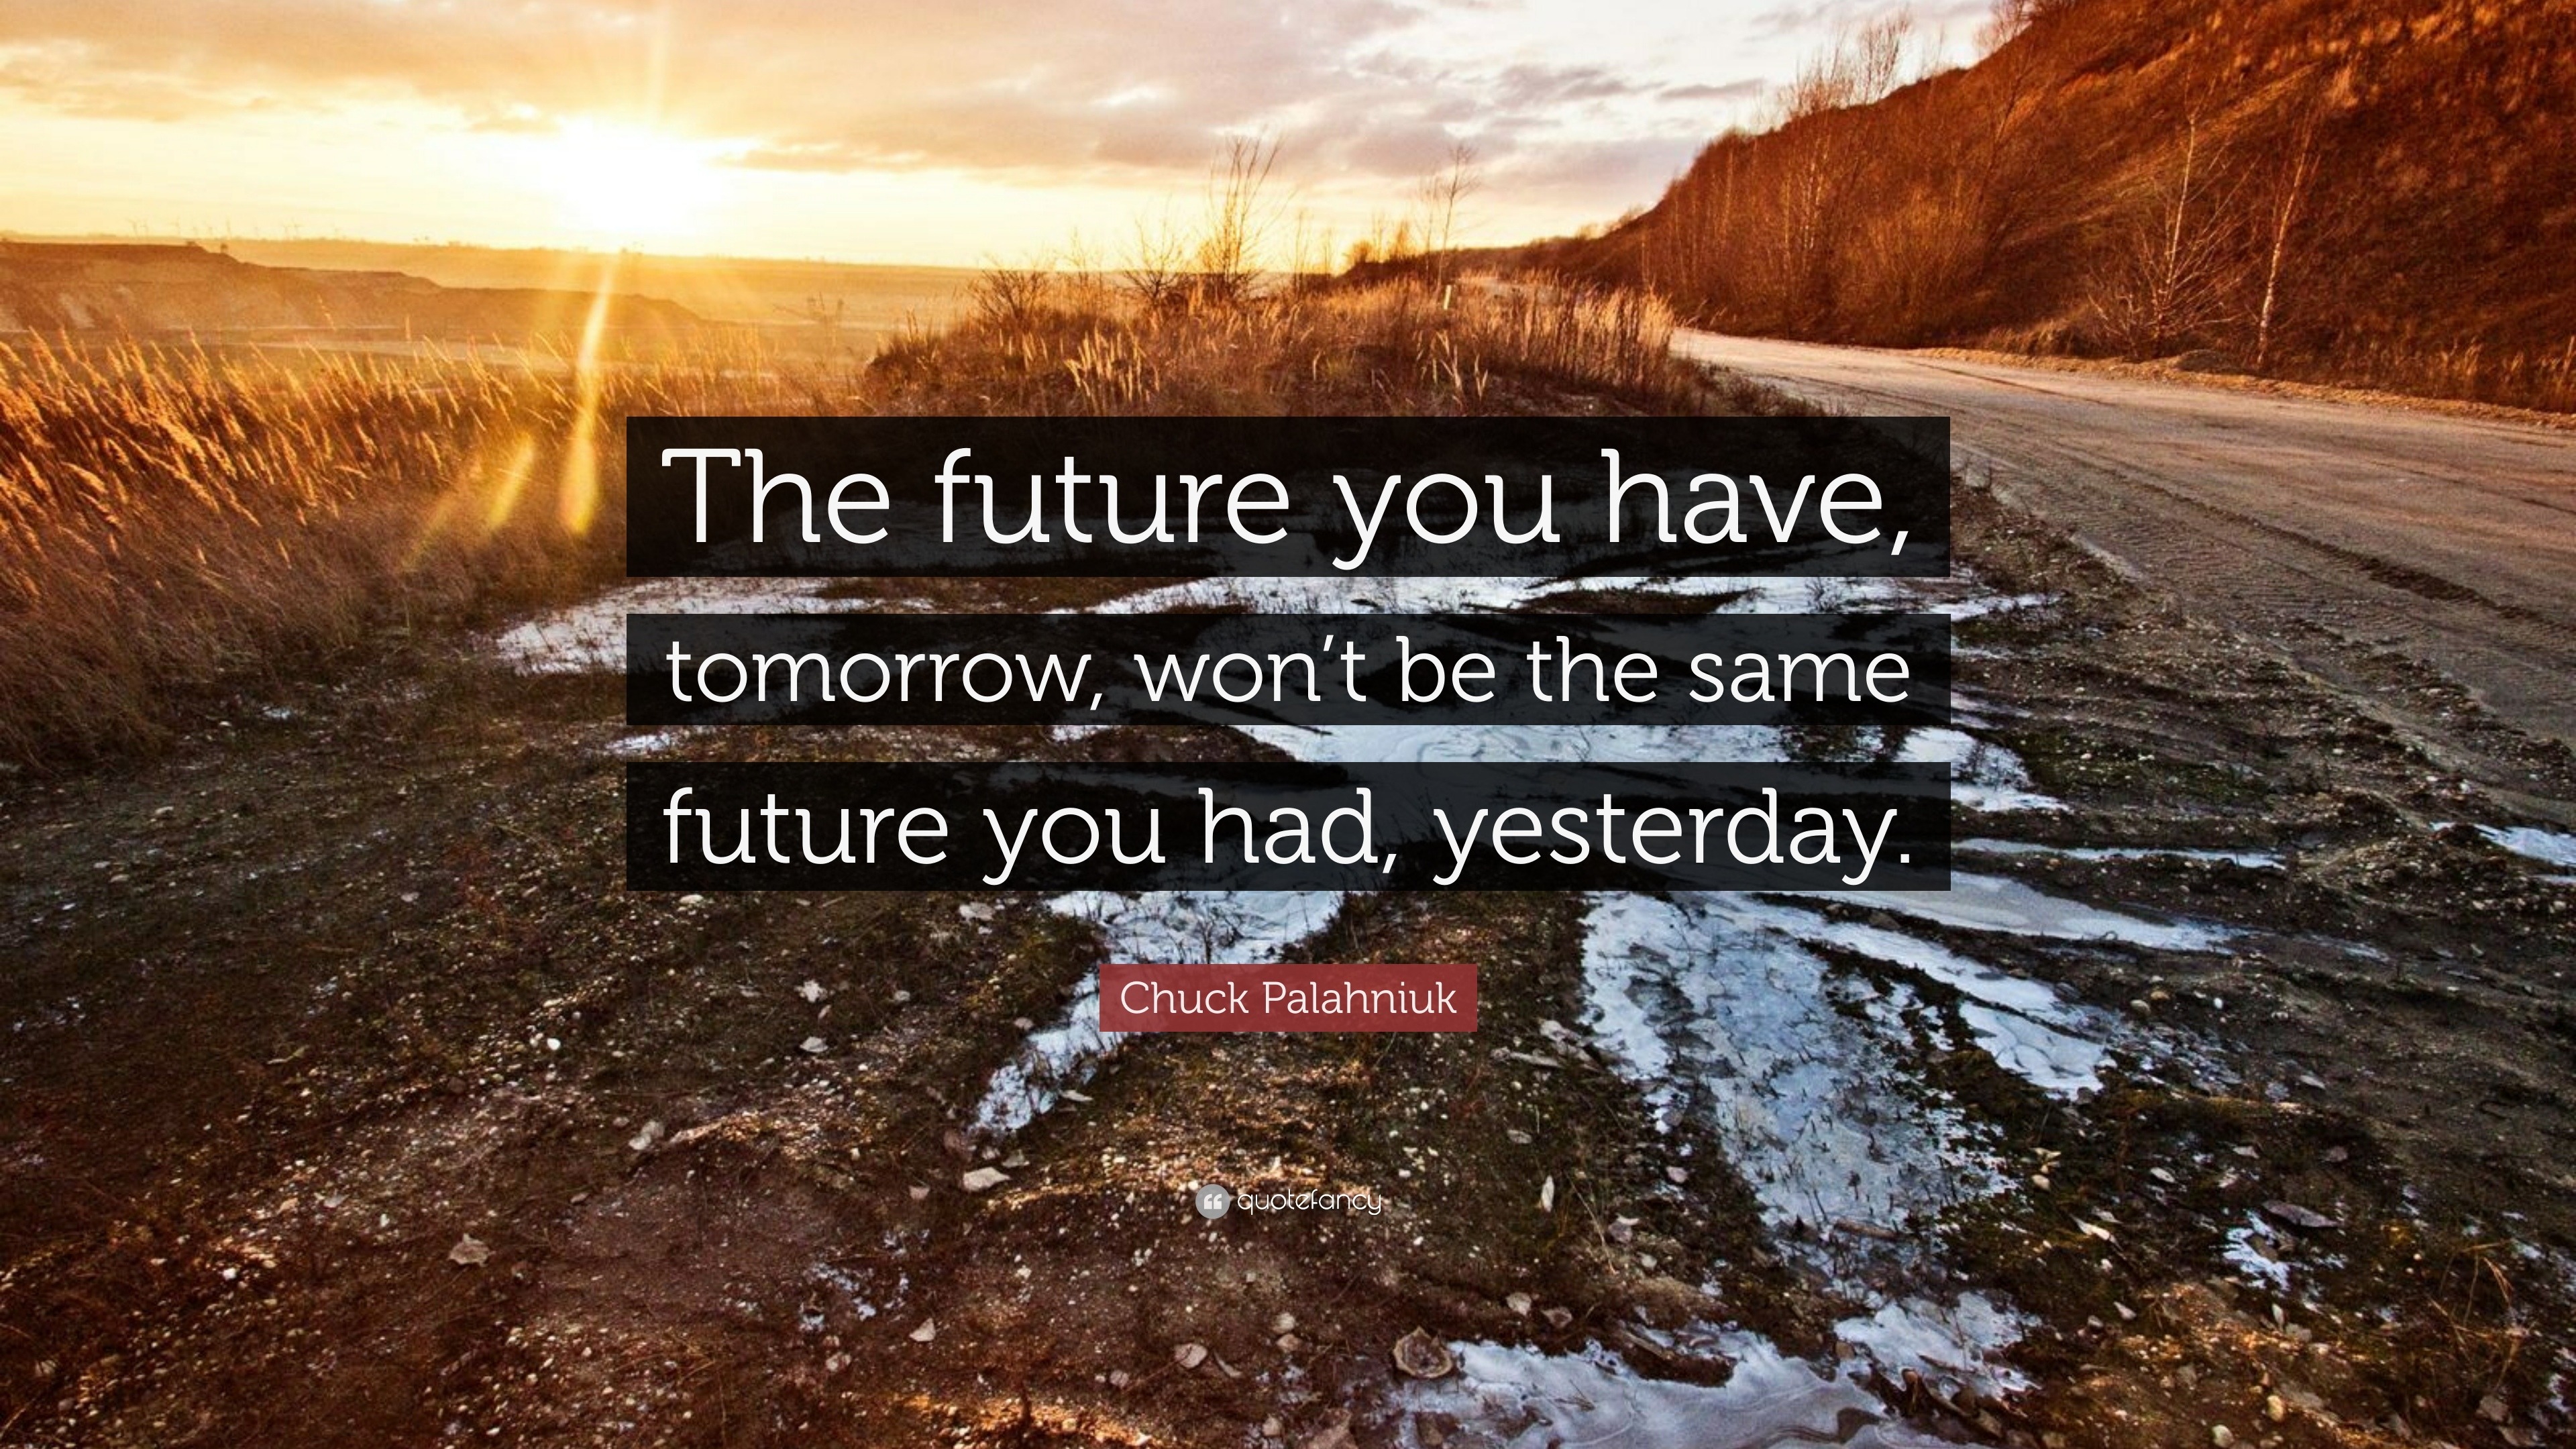 Chuck Palahniuk Quote: “The future you have, tomorrow, won’t be the ...